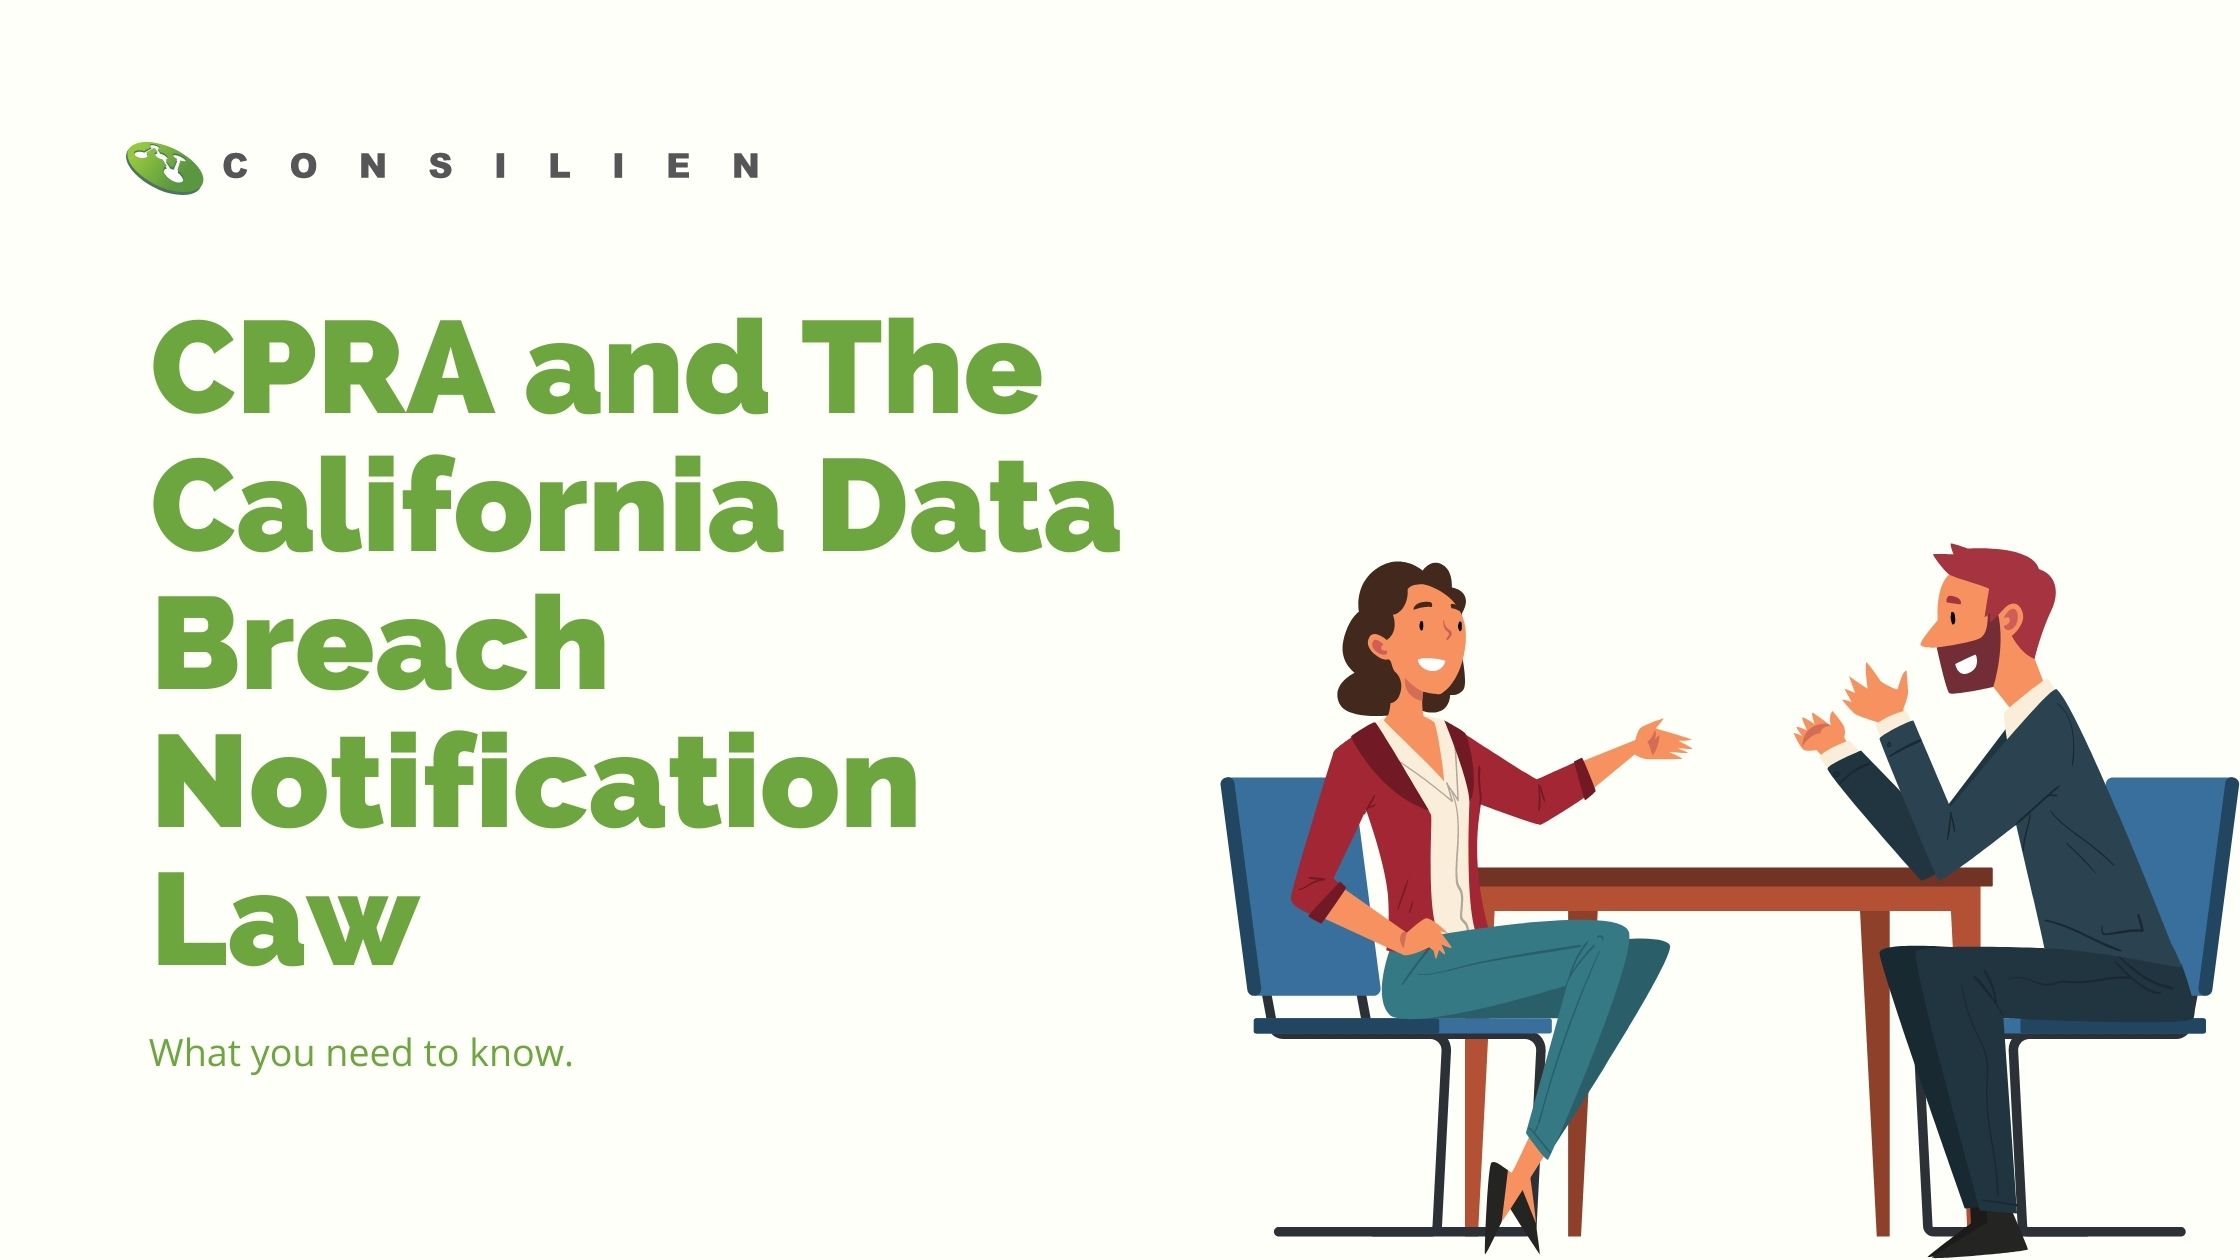 CPRA and the California Data Breach Notification Law